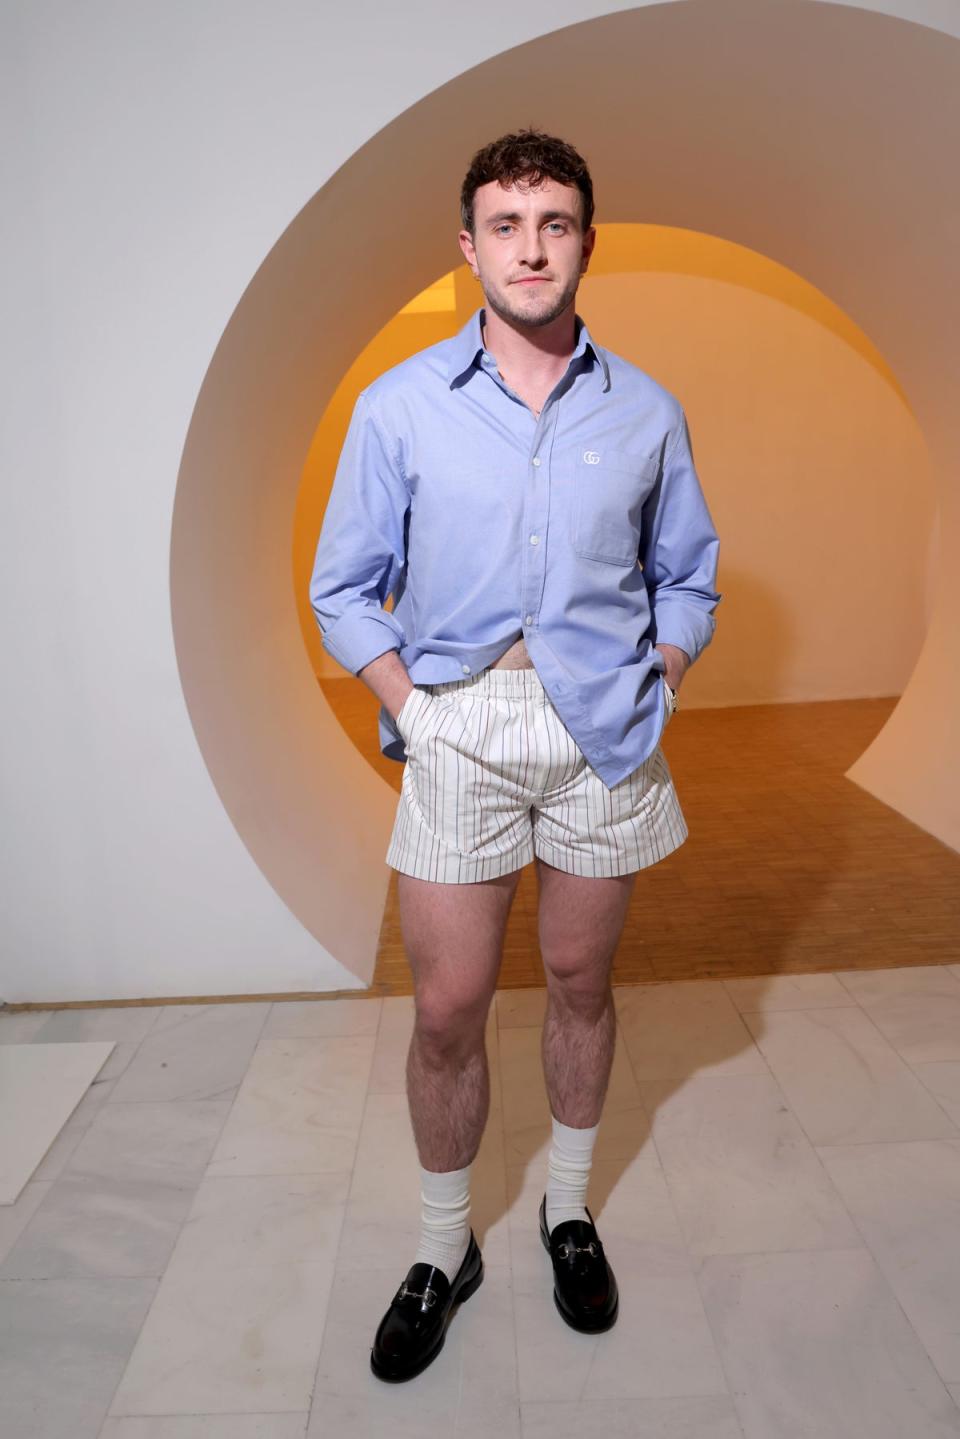 Paul Mescal in Gucci making easy work of being the internet’s fashion boyfriend (Getty Images for Gucci)